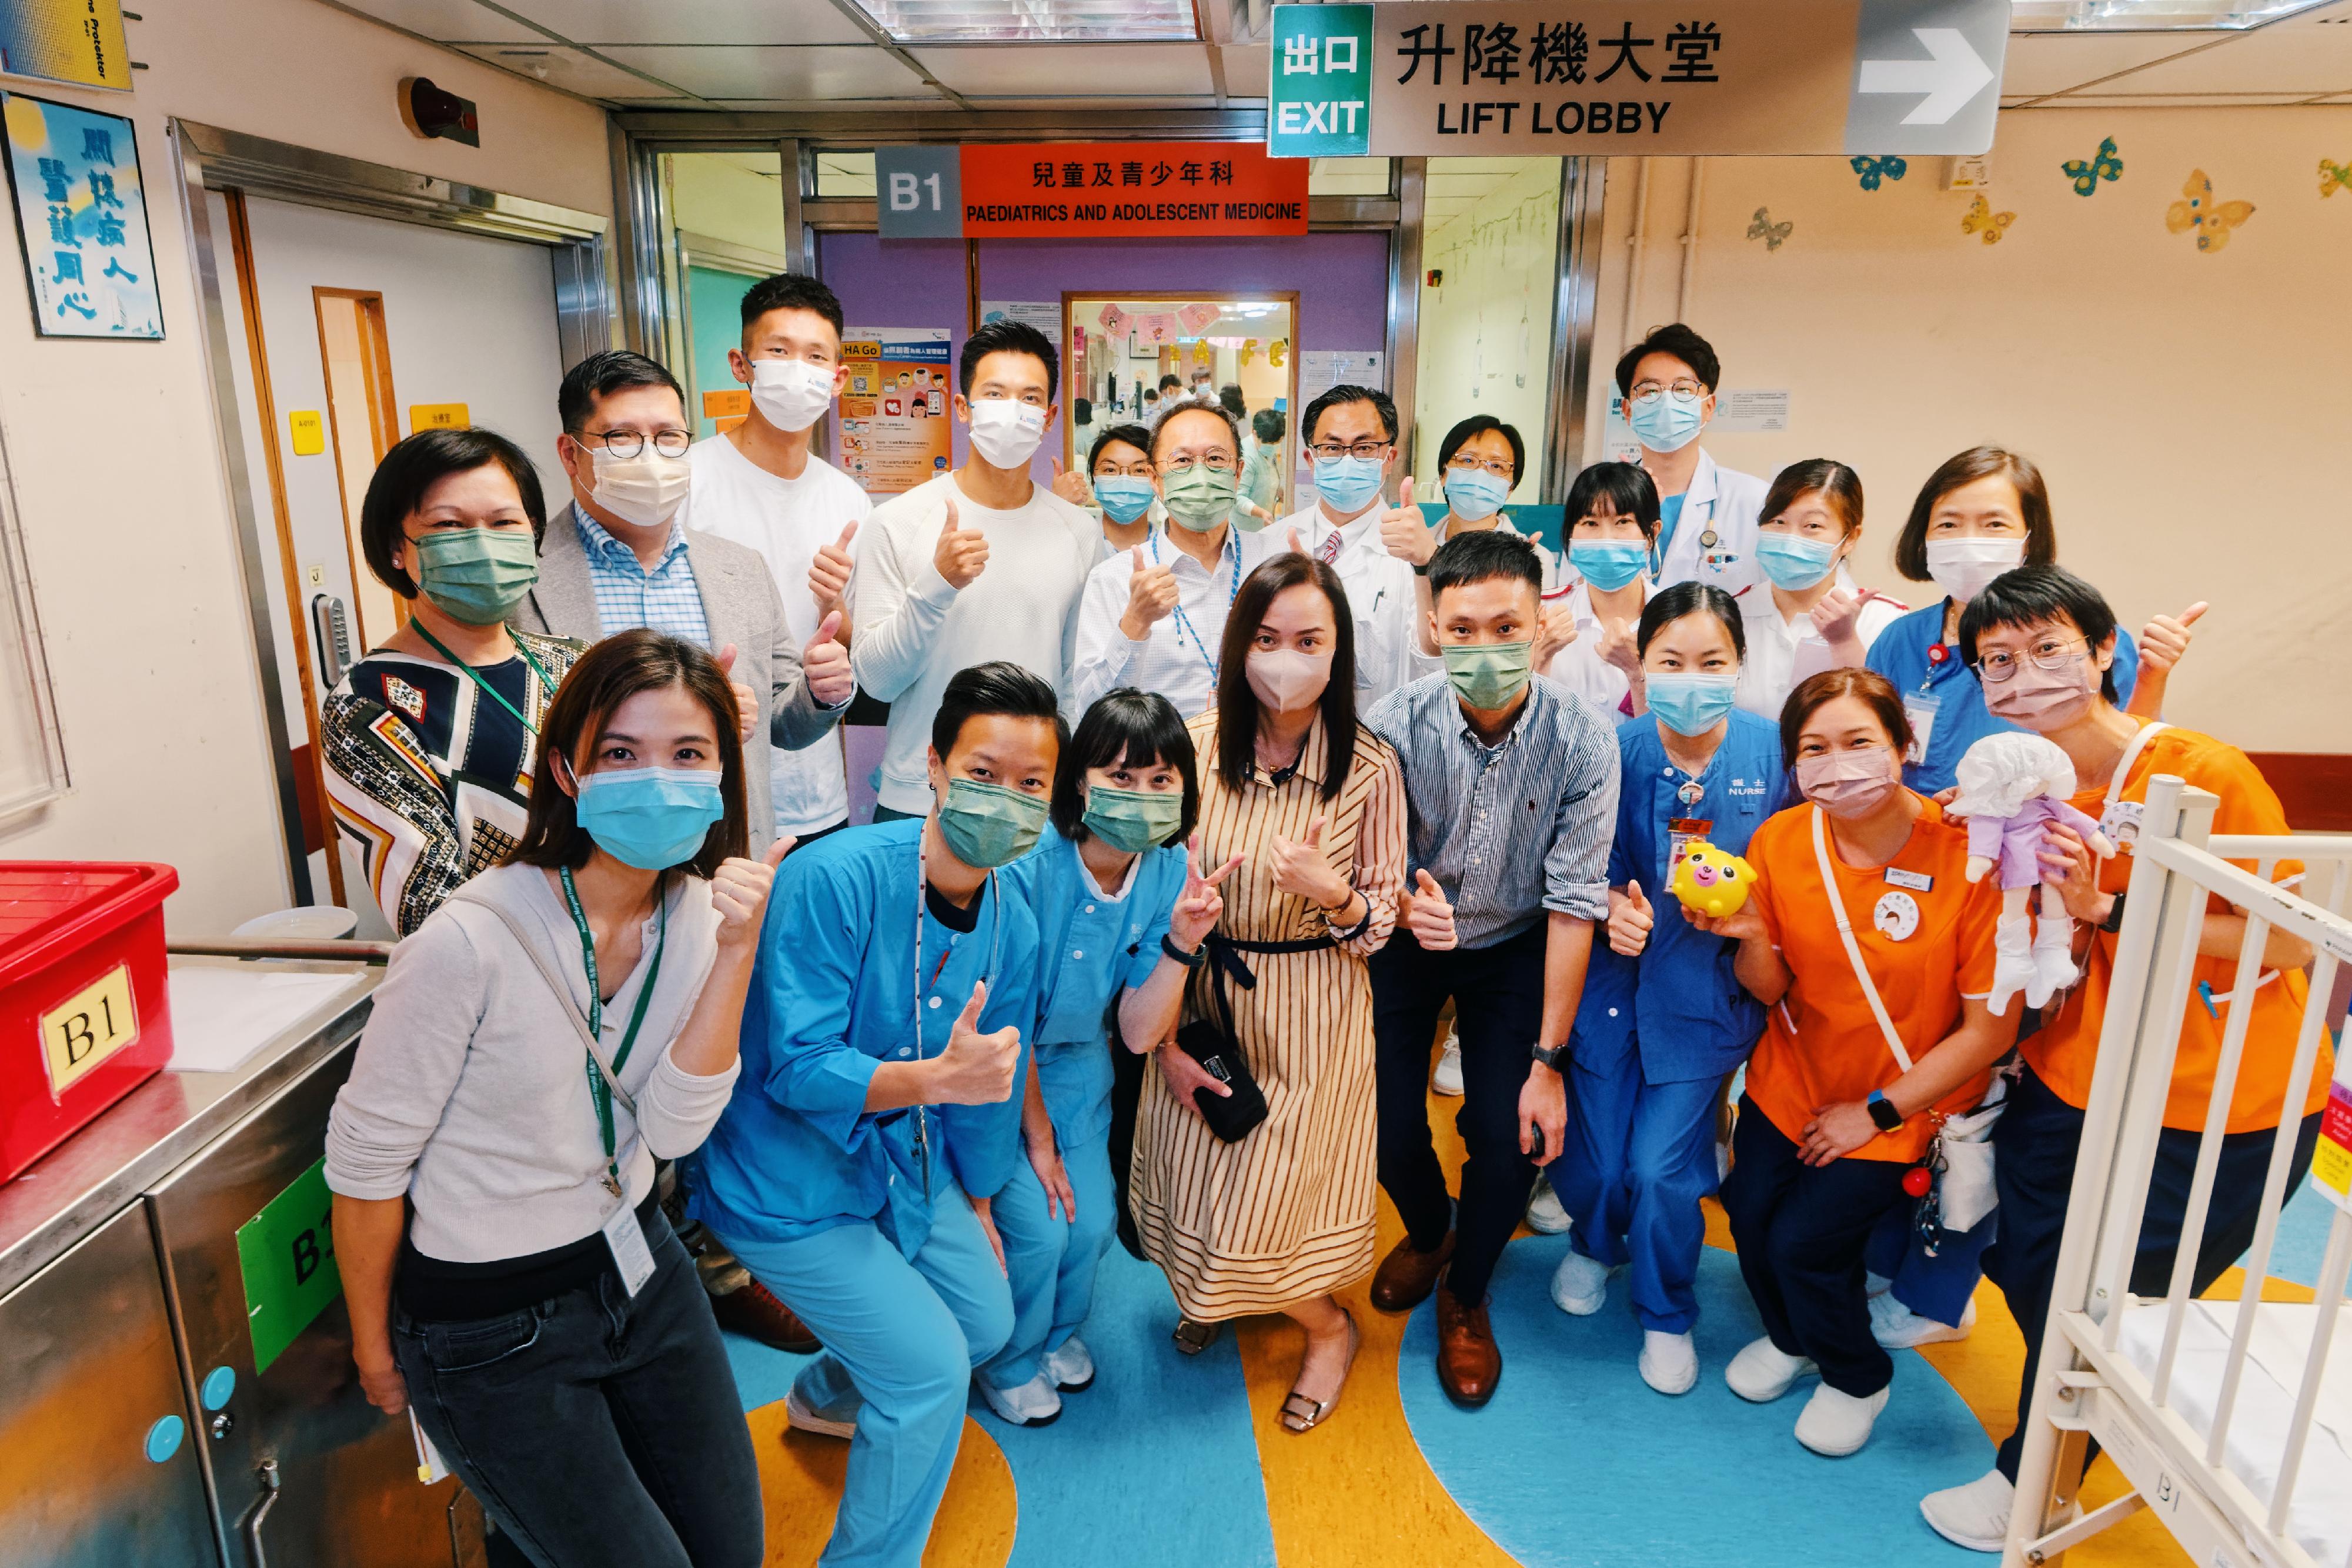 Lam San-tung (back row, fourth left) and Wong Wai-chun (back row, third left), who won the gold medal in Rowing Men's Coxless Pairs in the 19th Asian Games Hangzhou, visited Princess Margaret Hospital on November 13. They expressed gratitude to healthcare workers for their commitment and hoped to use their visit as an opportunity to cheer up all healthcare workers.